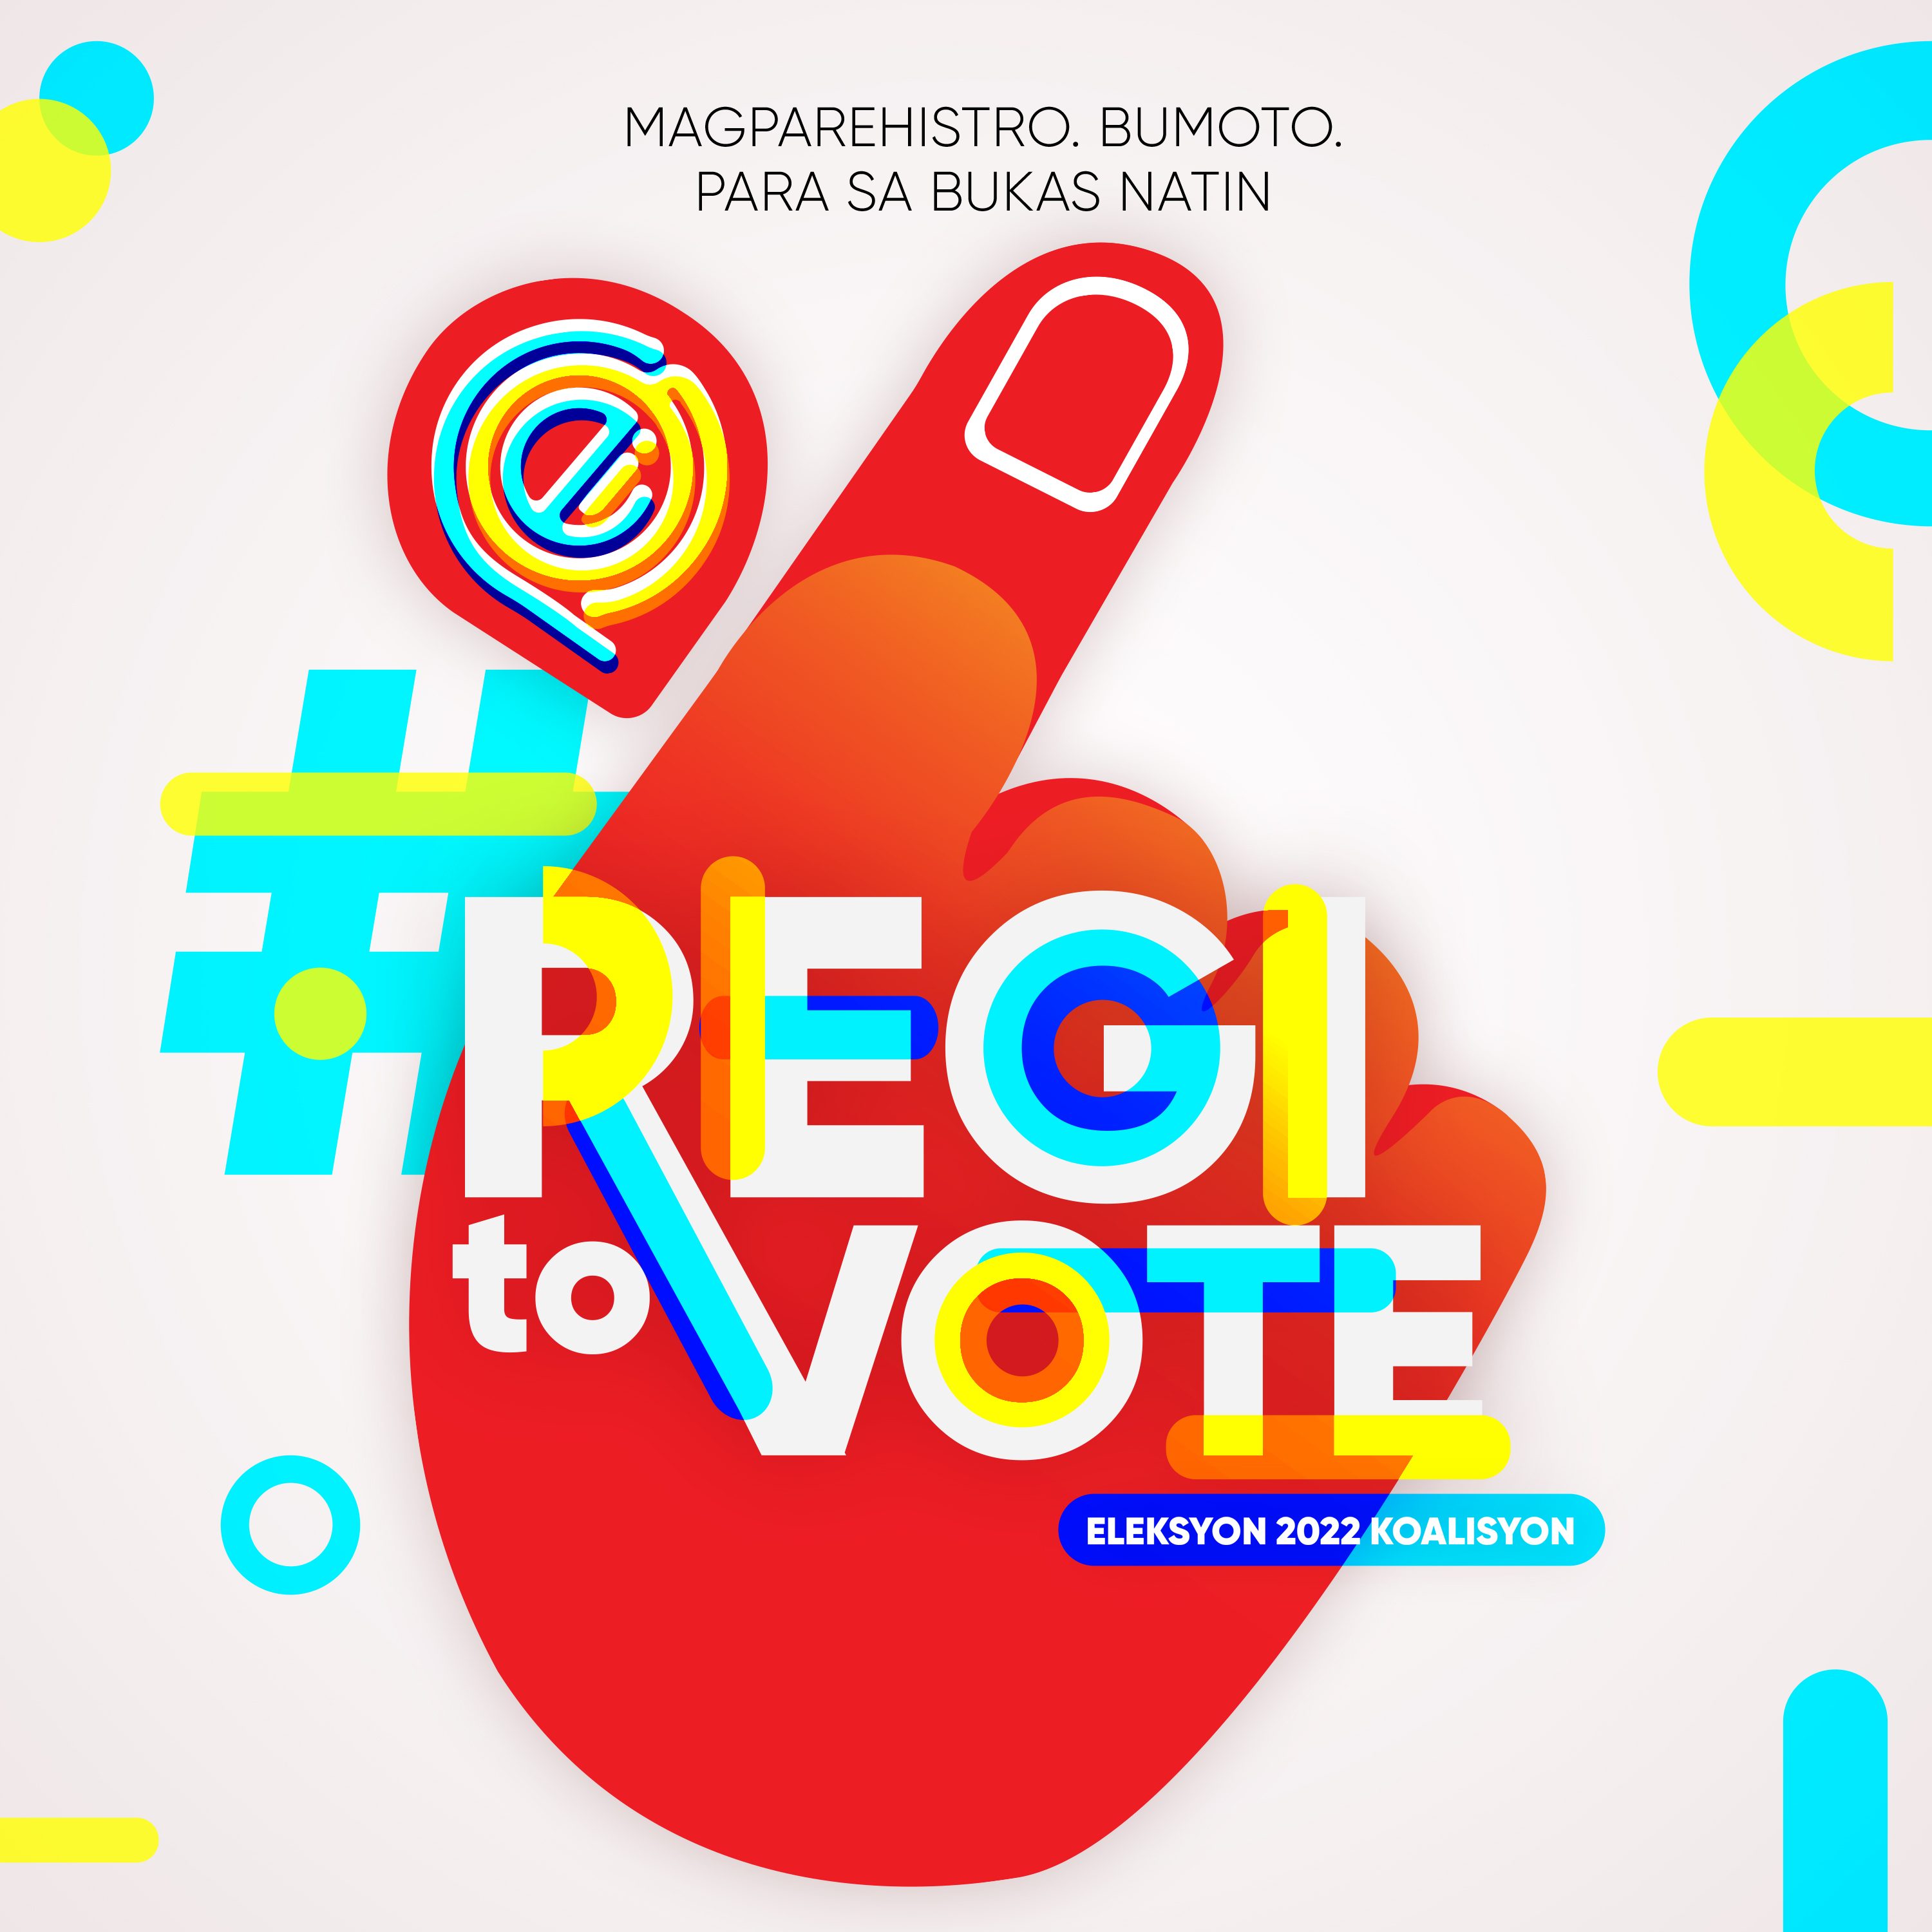 Voters’ registration coalition targets 7 million new voters for 2022 Philippine elections